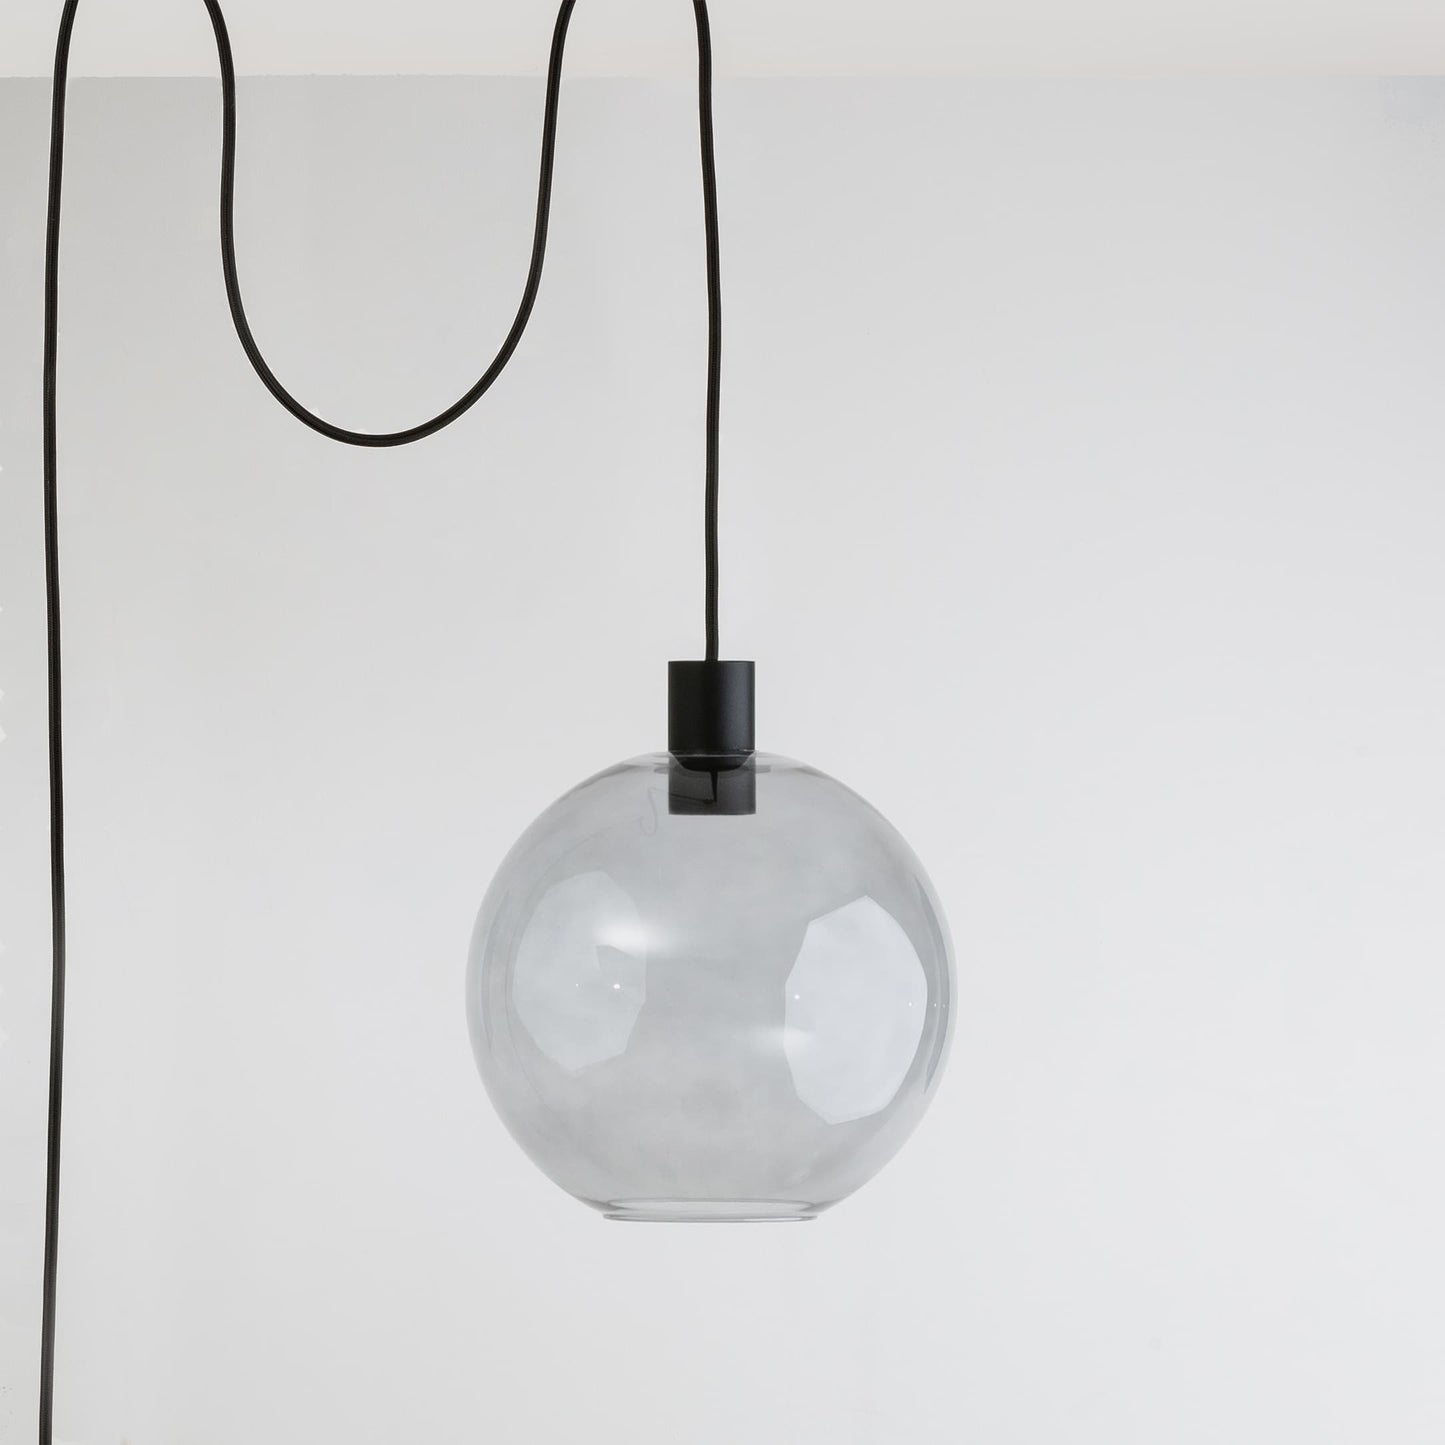 10” All-in-One (AiO) Globe Ceiling Plug-In Pendant